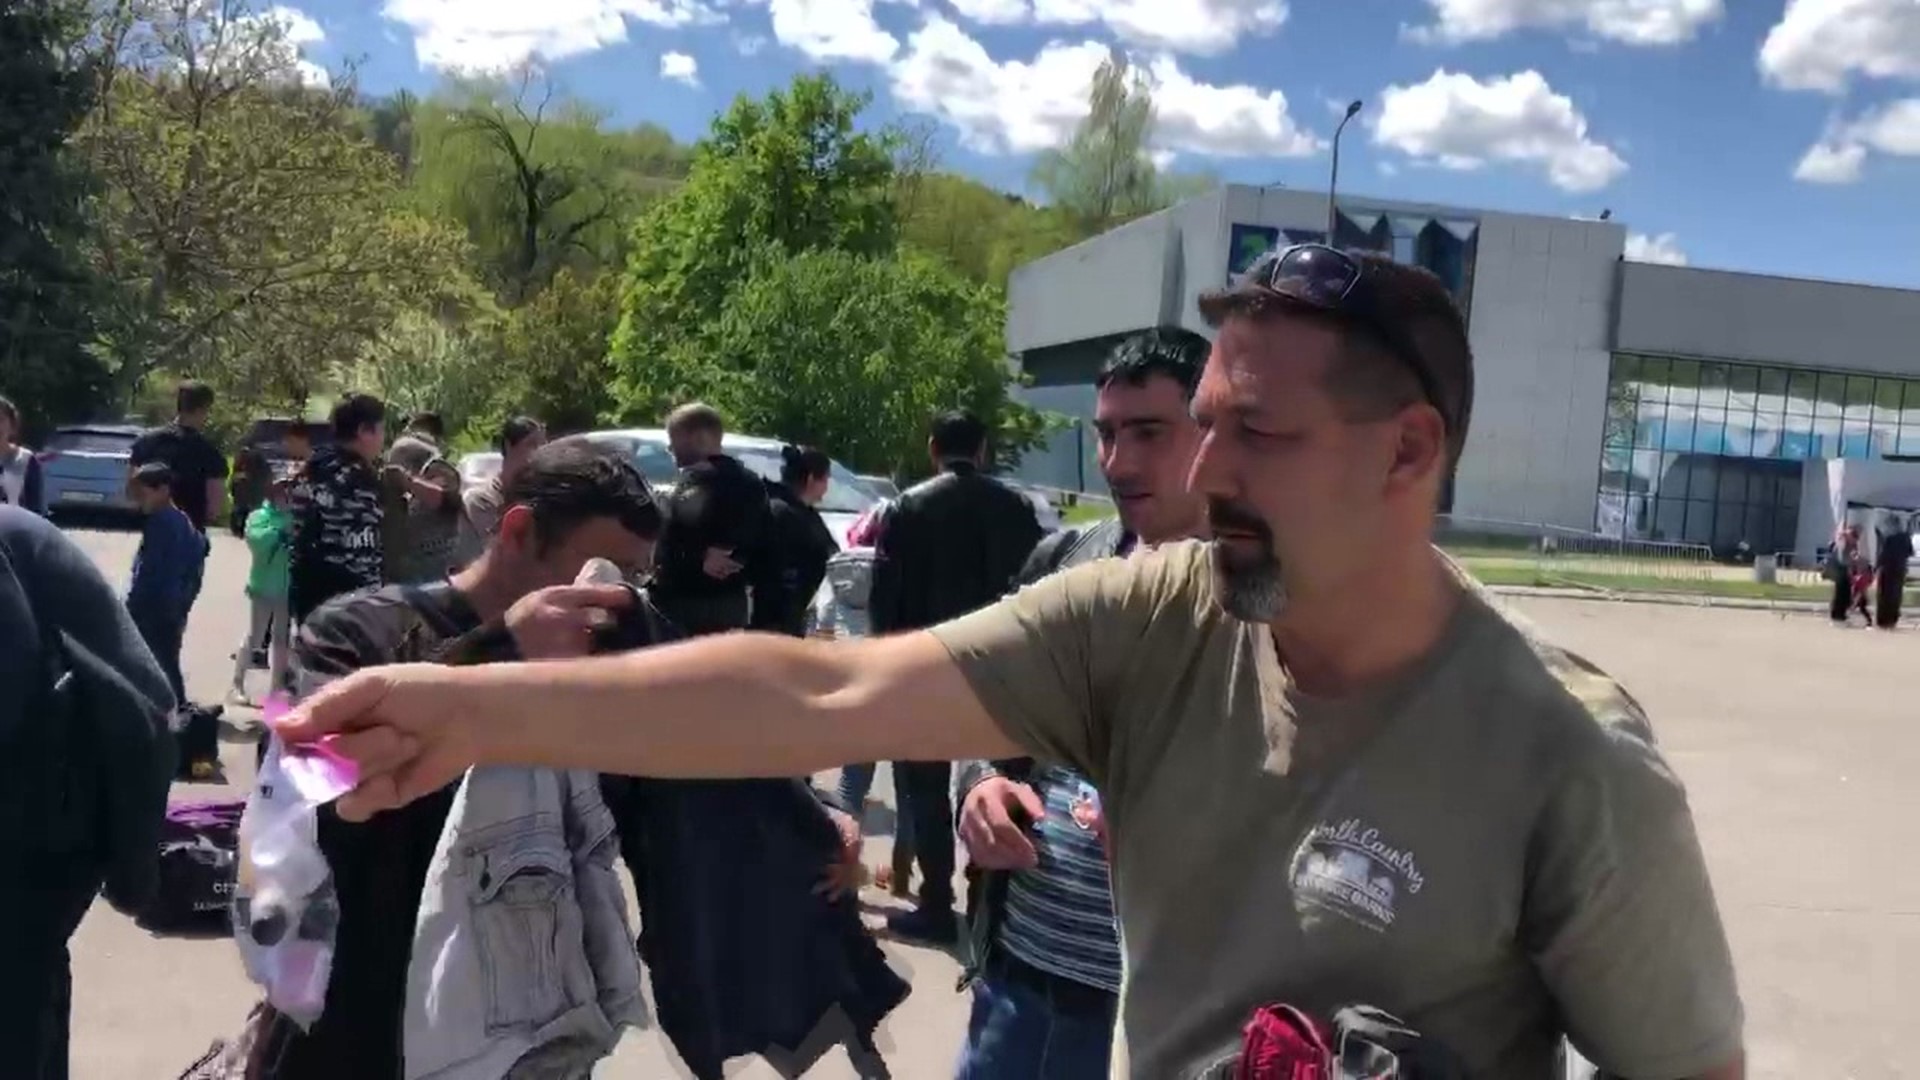 A man with Pennsylvania roots is now reaching out to refugees fleeing war and offering help. He's on the ground in Moldova, near the Ukrainian border.